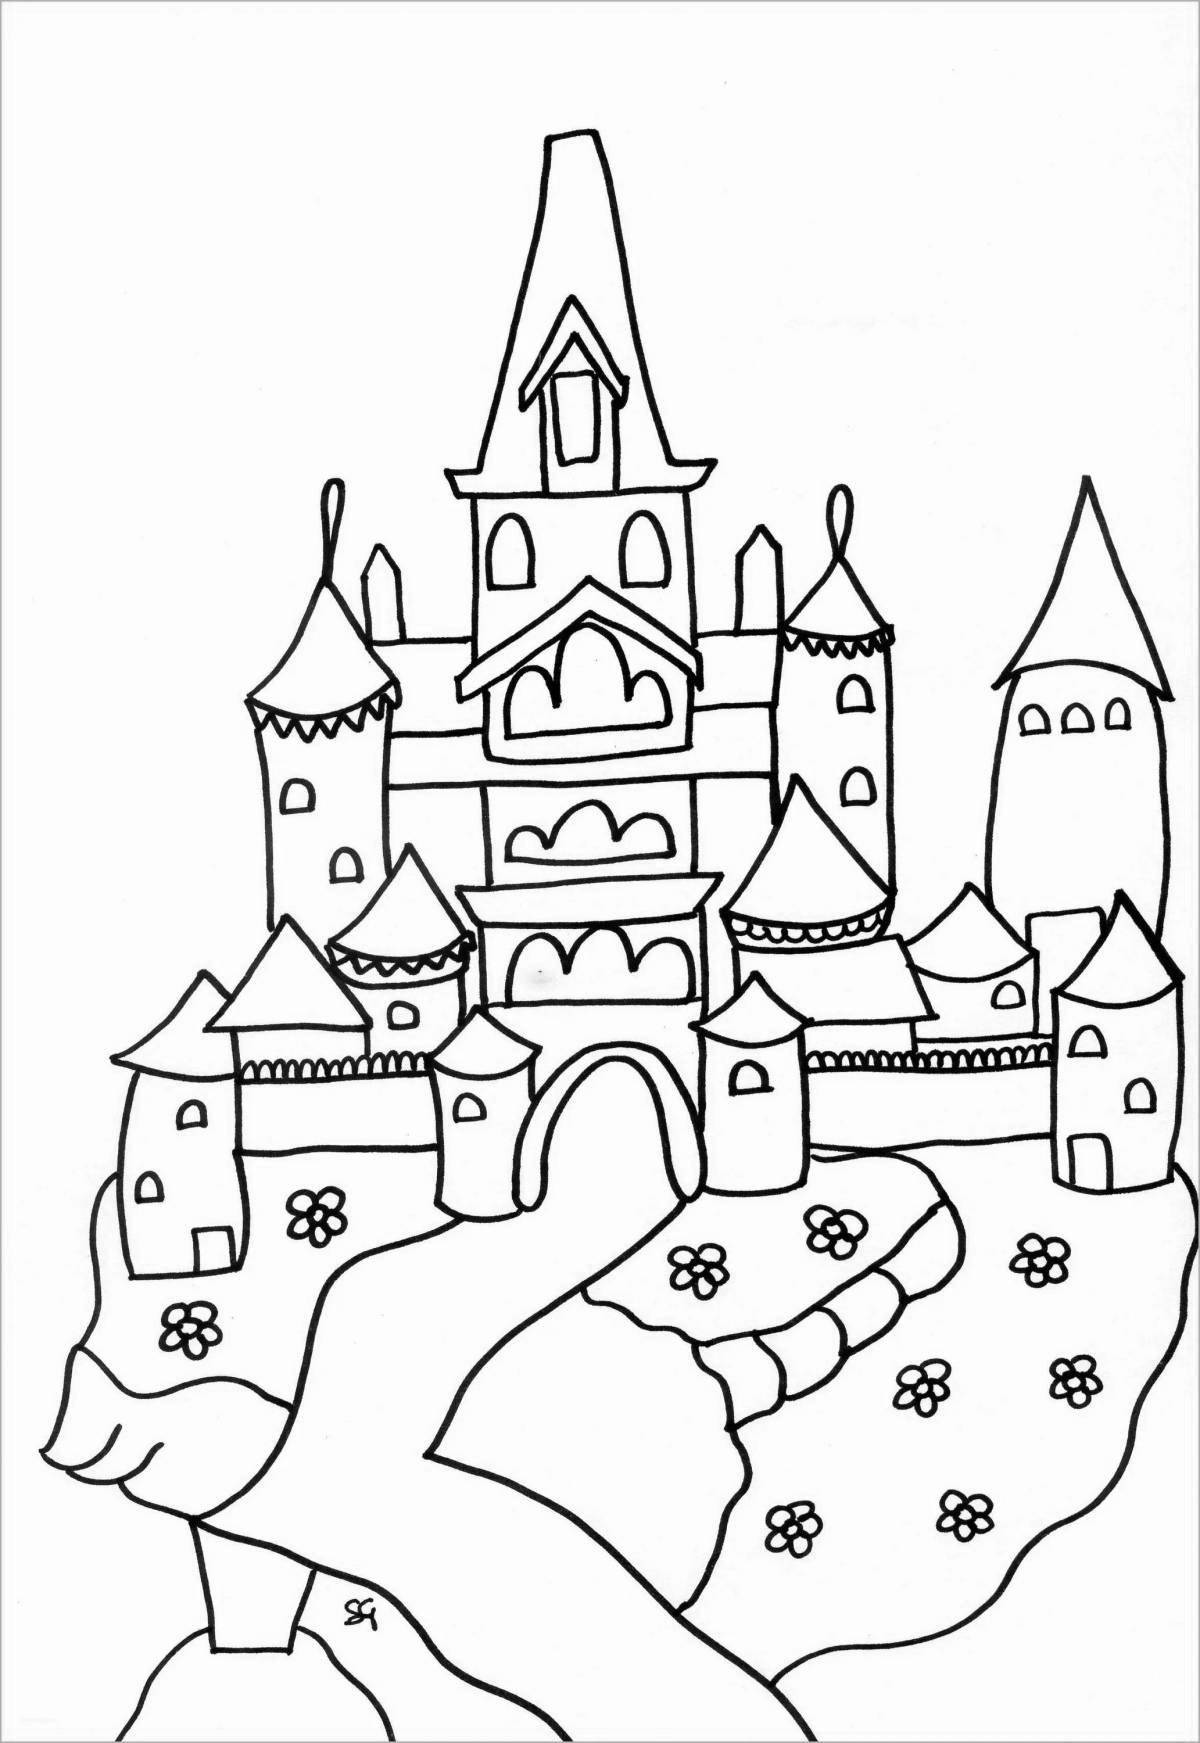 Coloring book bright palace of the snow queen